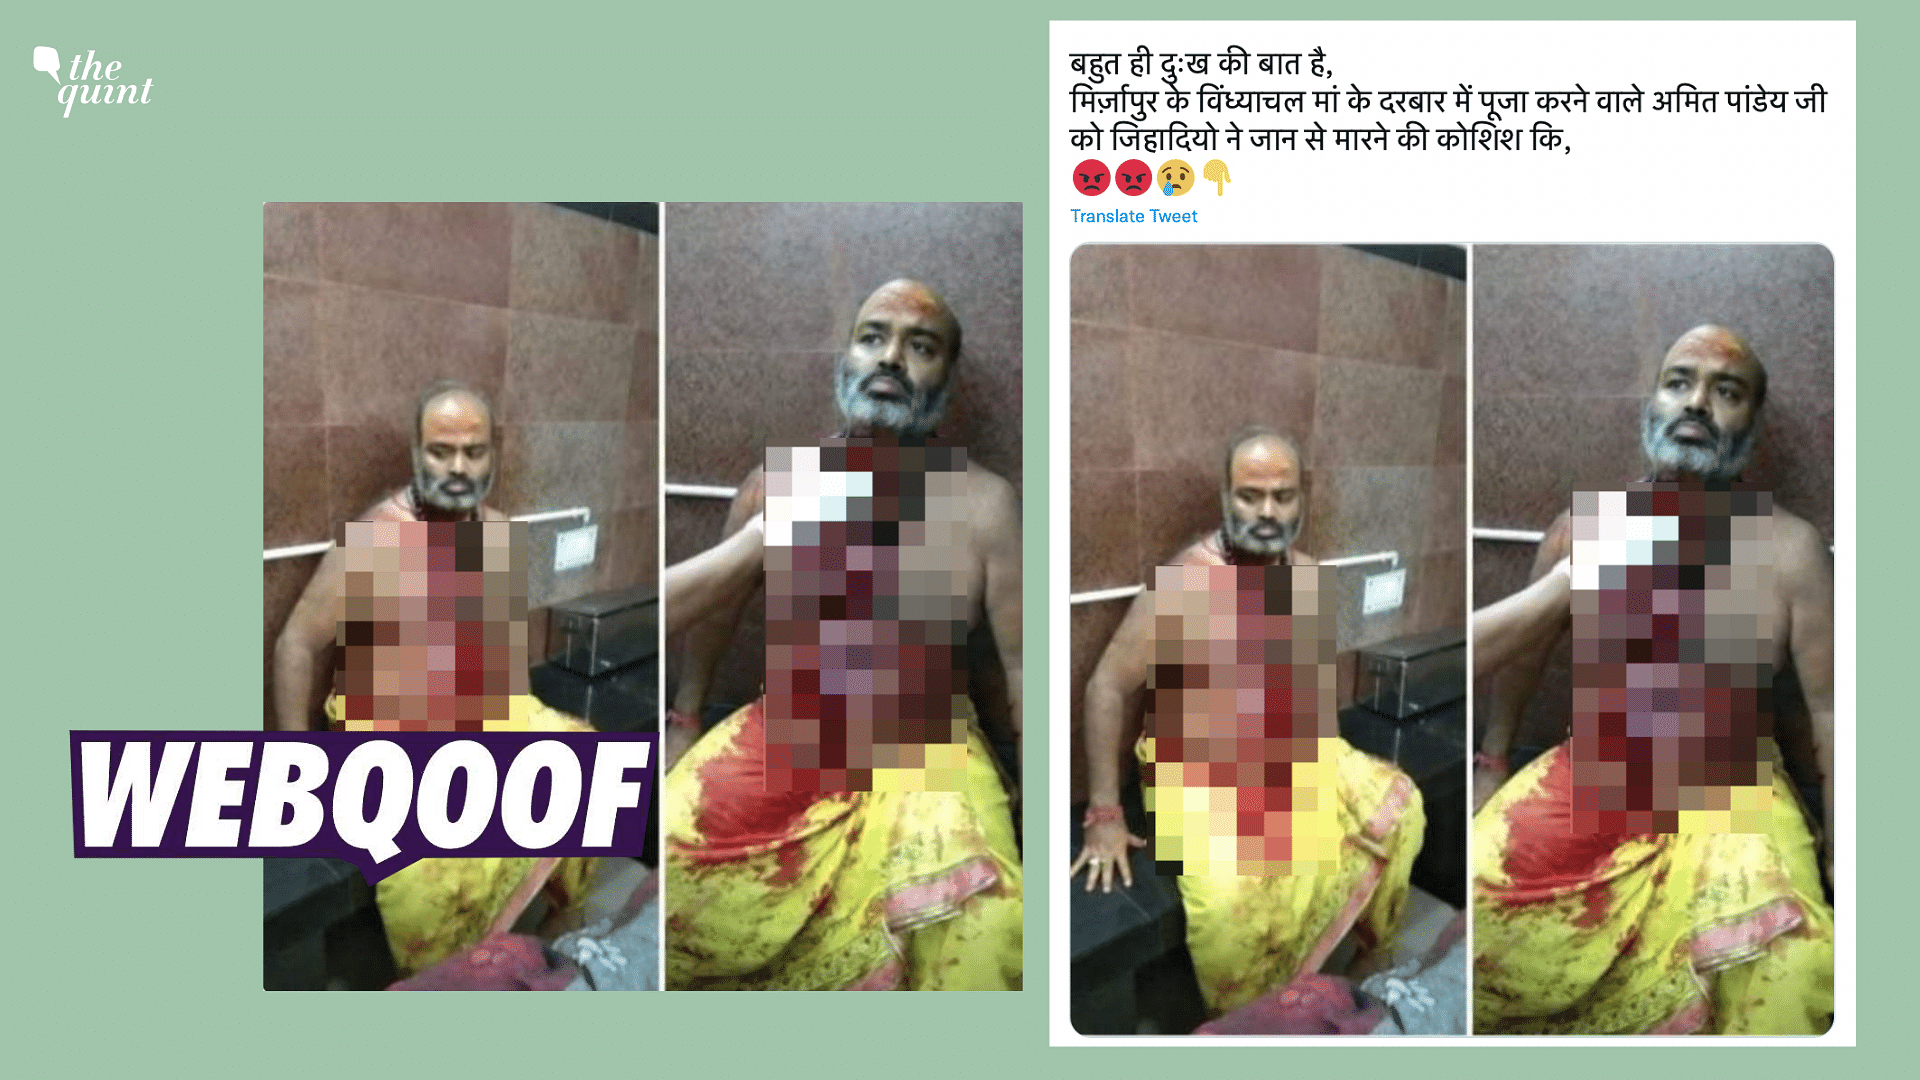 <div class="paragraphs"><p>The photos show a priest who was injured after an altercation with another priest from the same temple.</p></div>